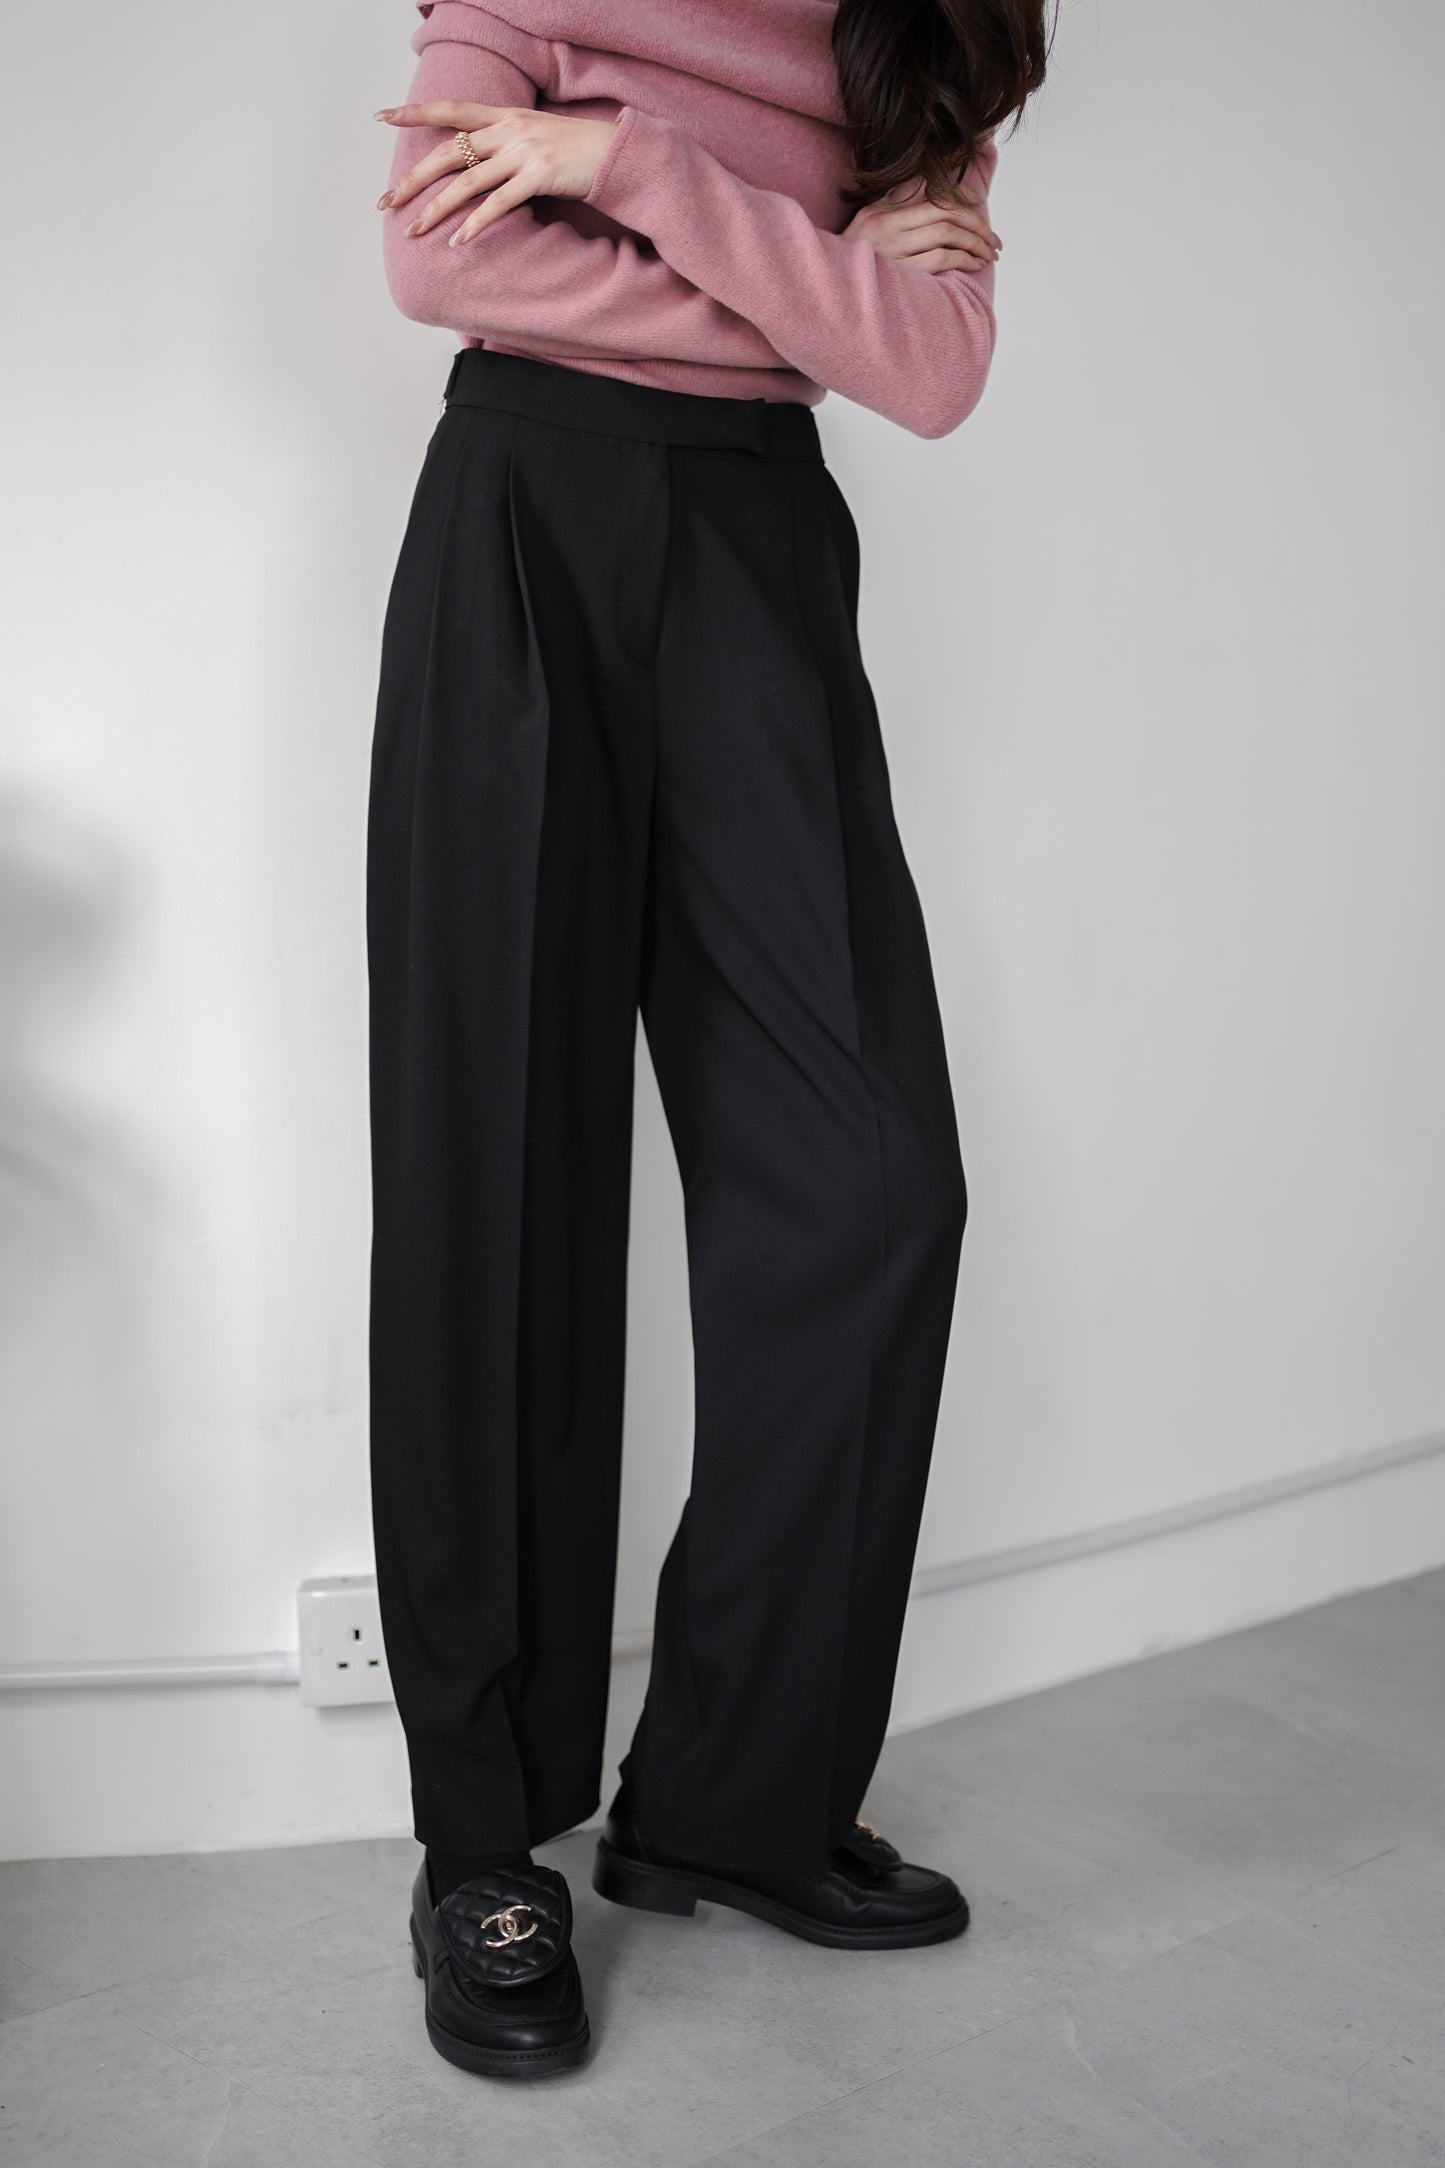 𝙆𝙚𝙙𝙞 𝘽𝙚𝙨𝙩✨ Tapered Suit Pants